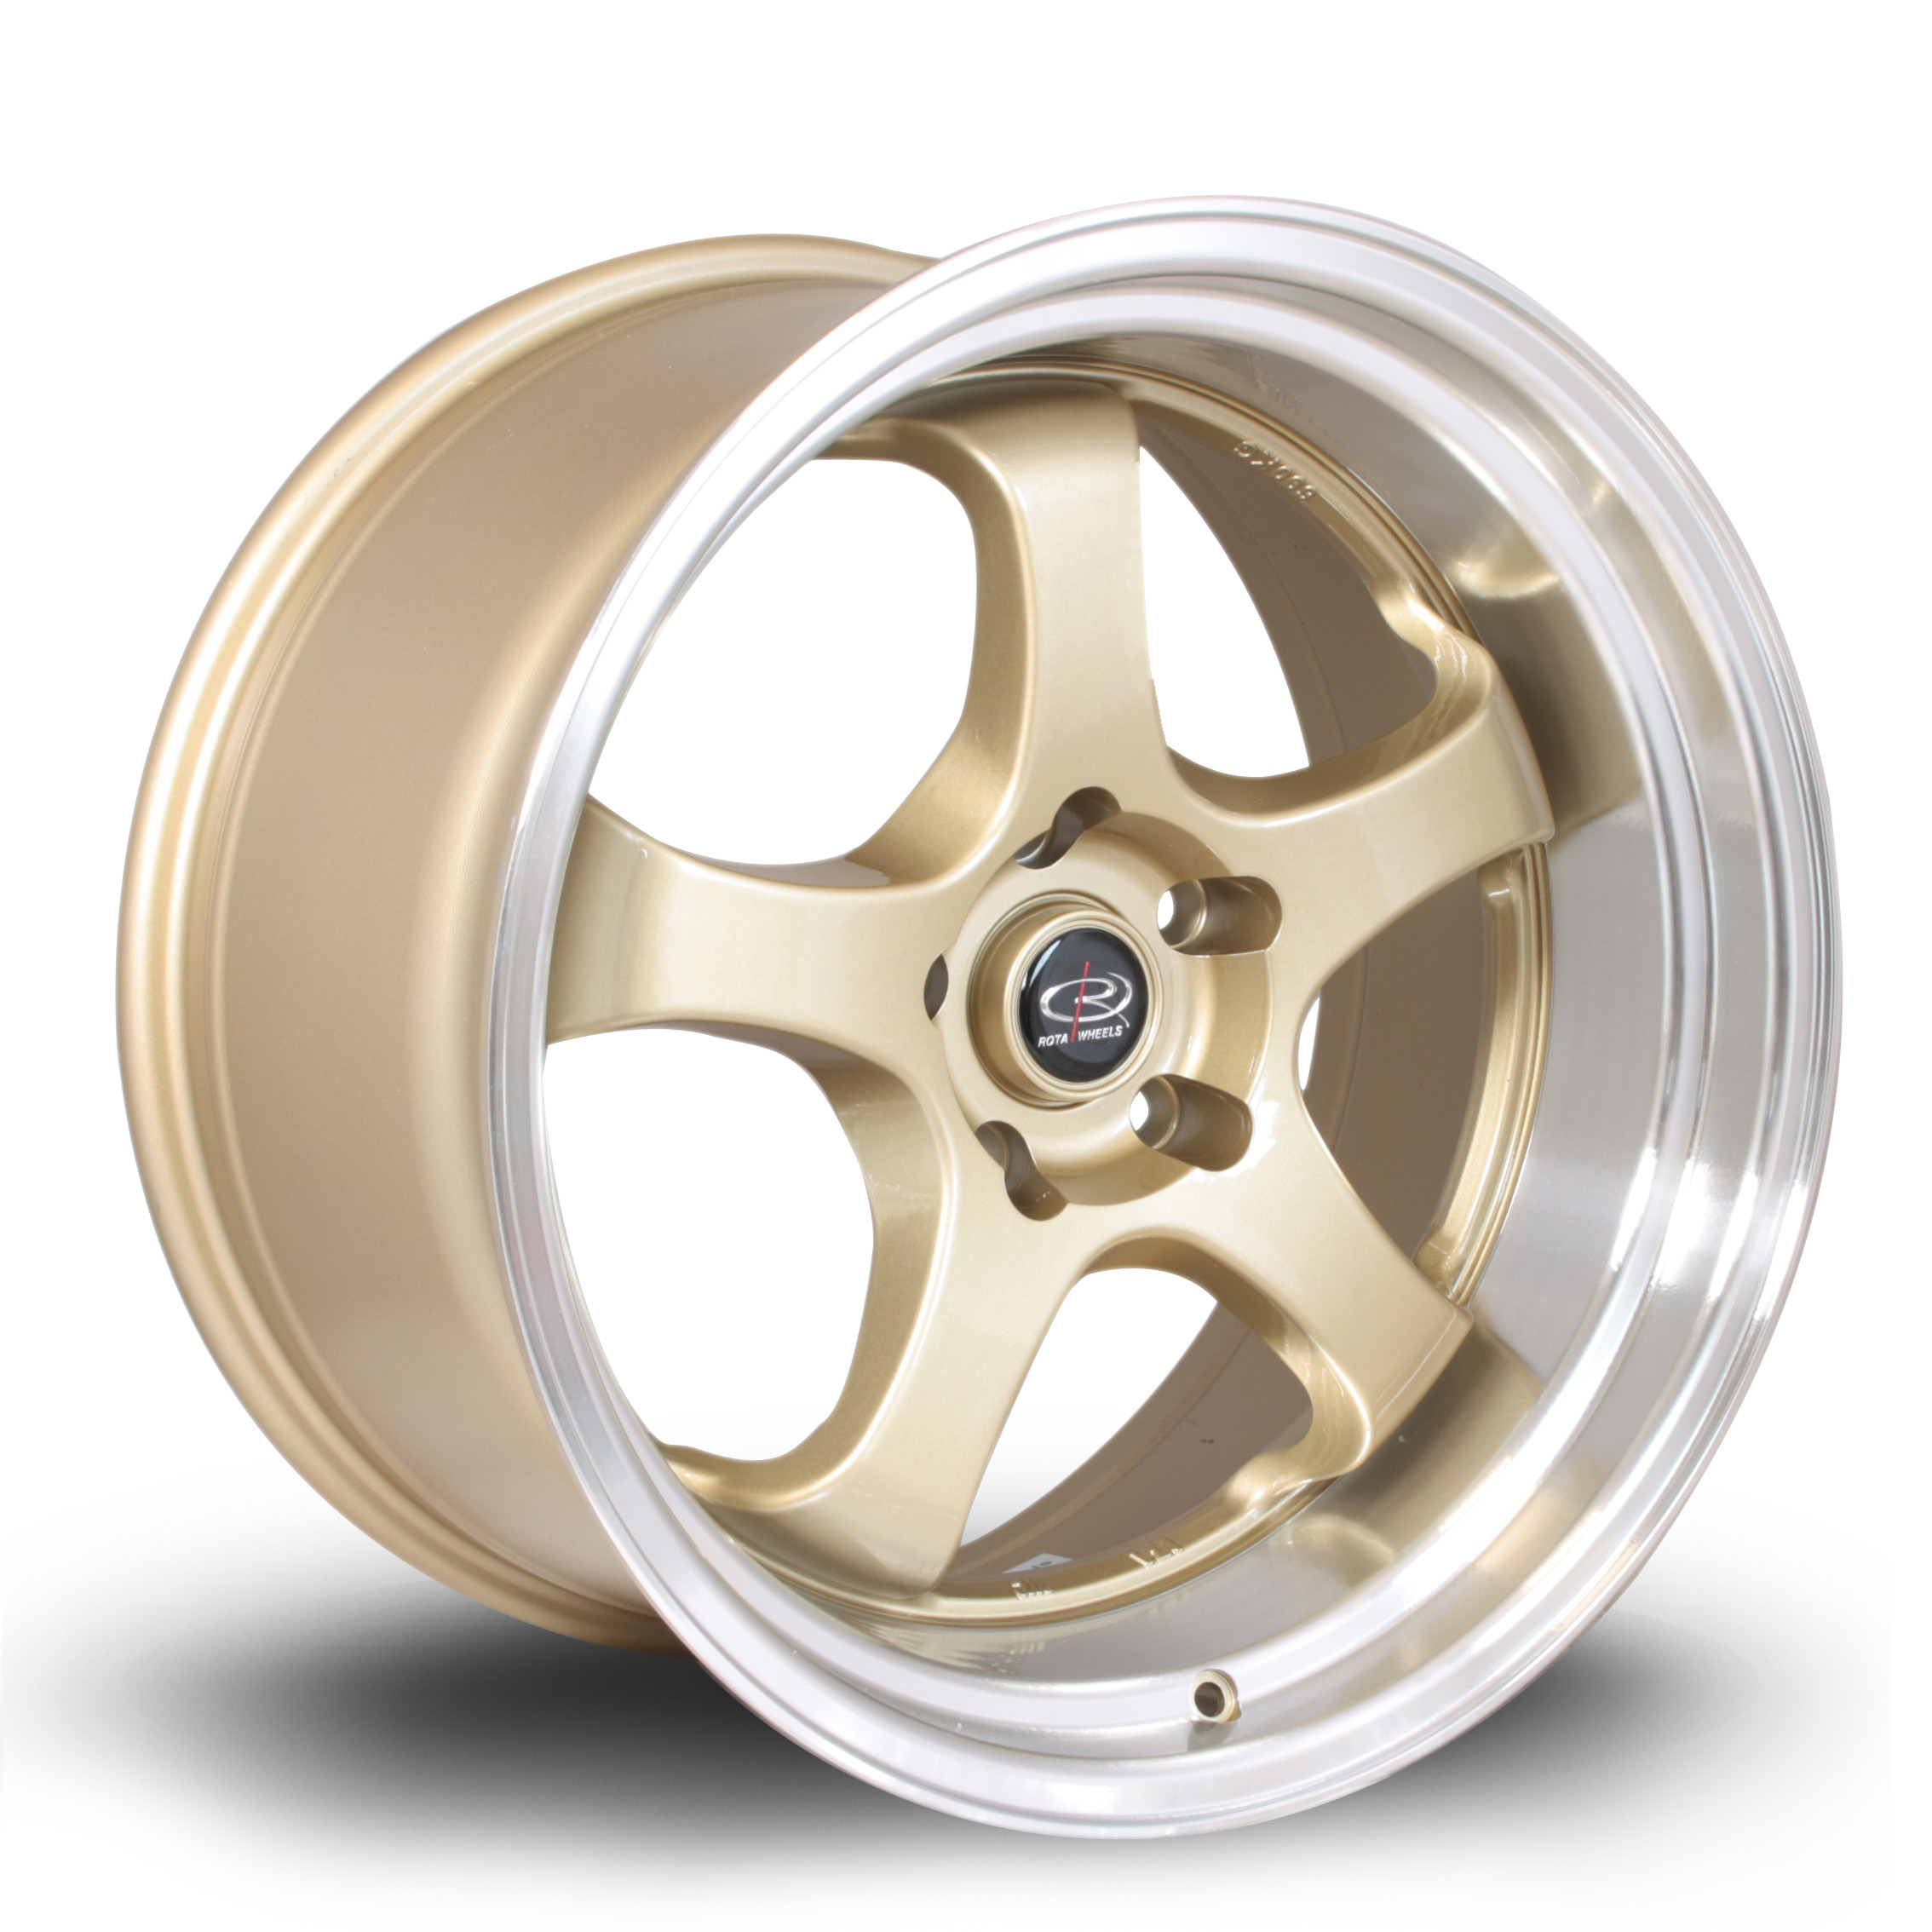 D2EX 18x10 5x114 ET12 Gold with Polished Lip